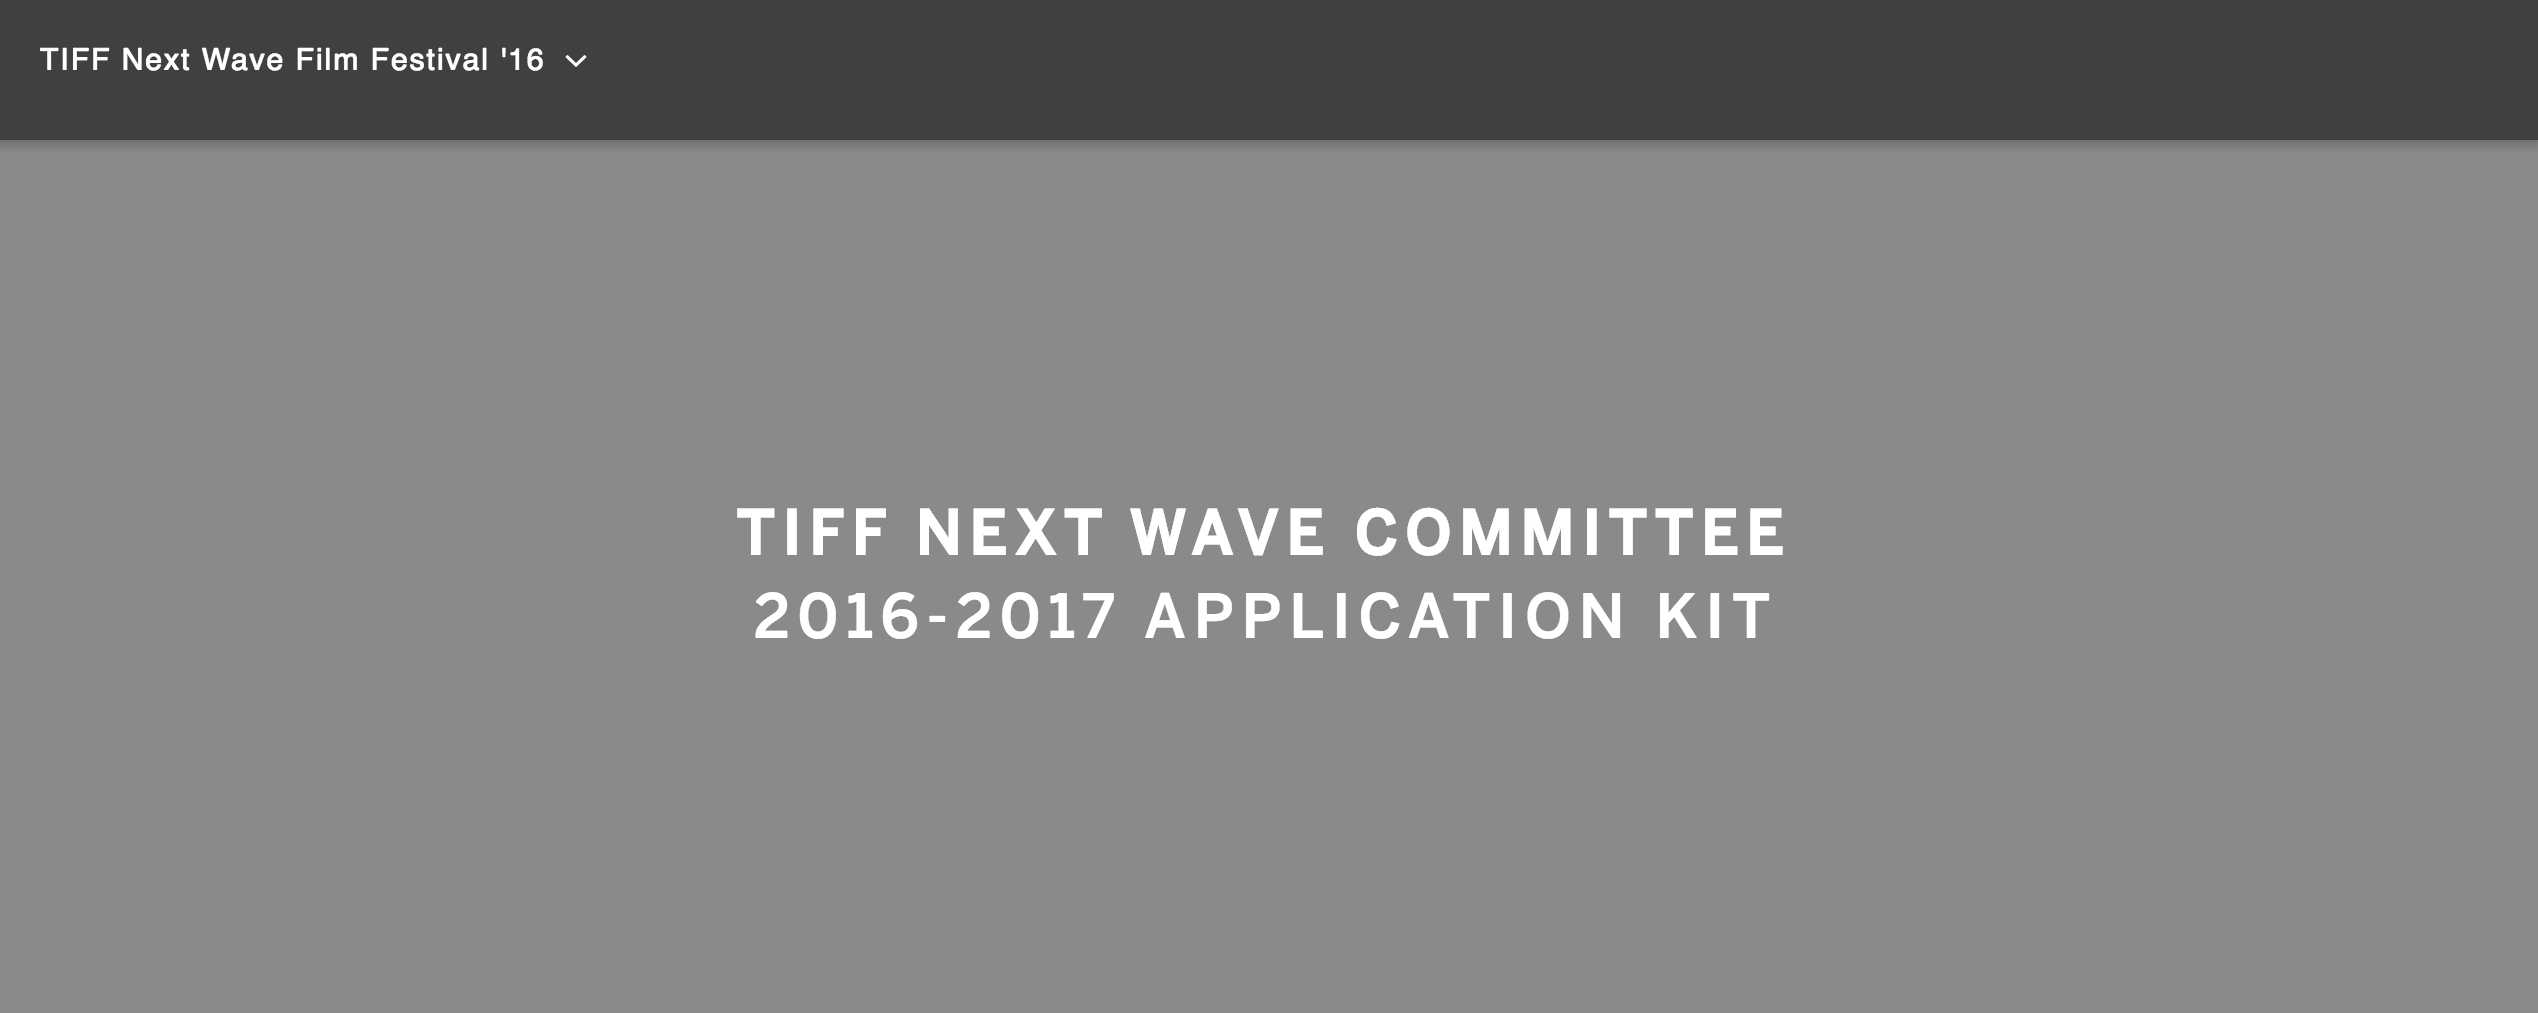 TIFF Next Wave Committee Applications are Available